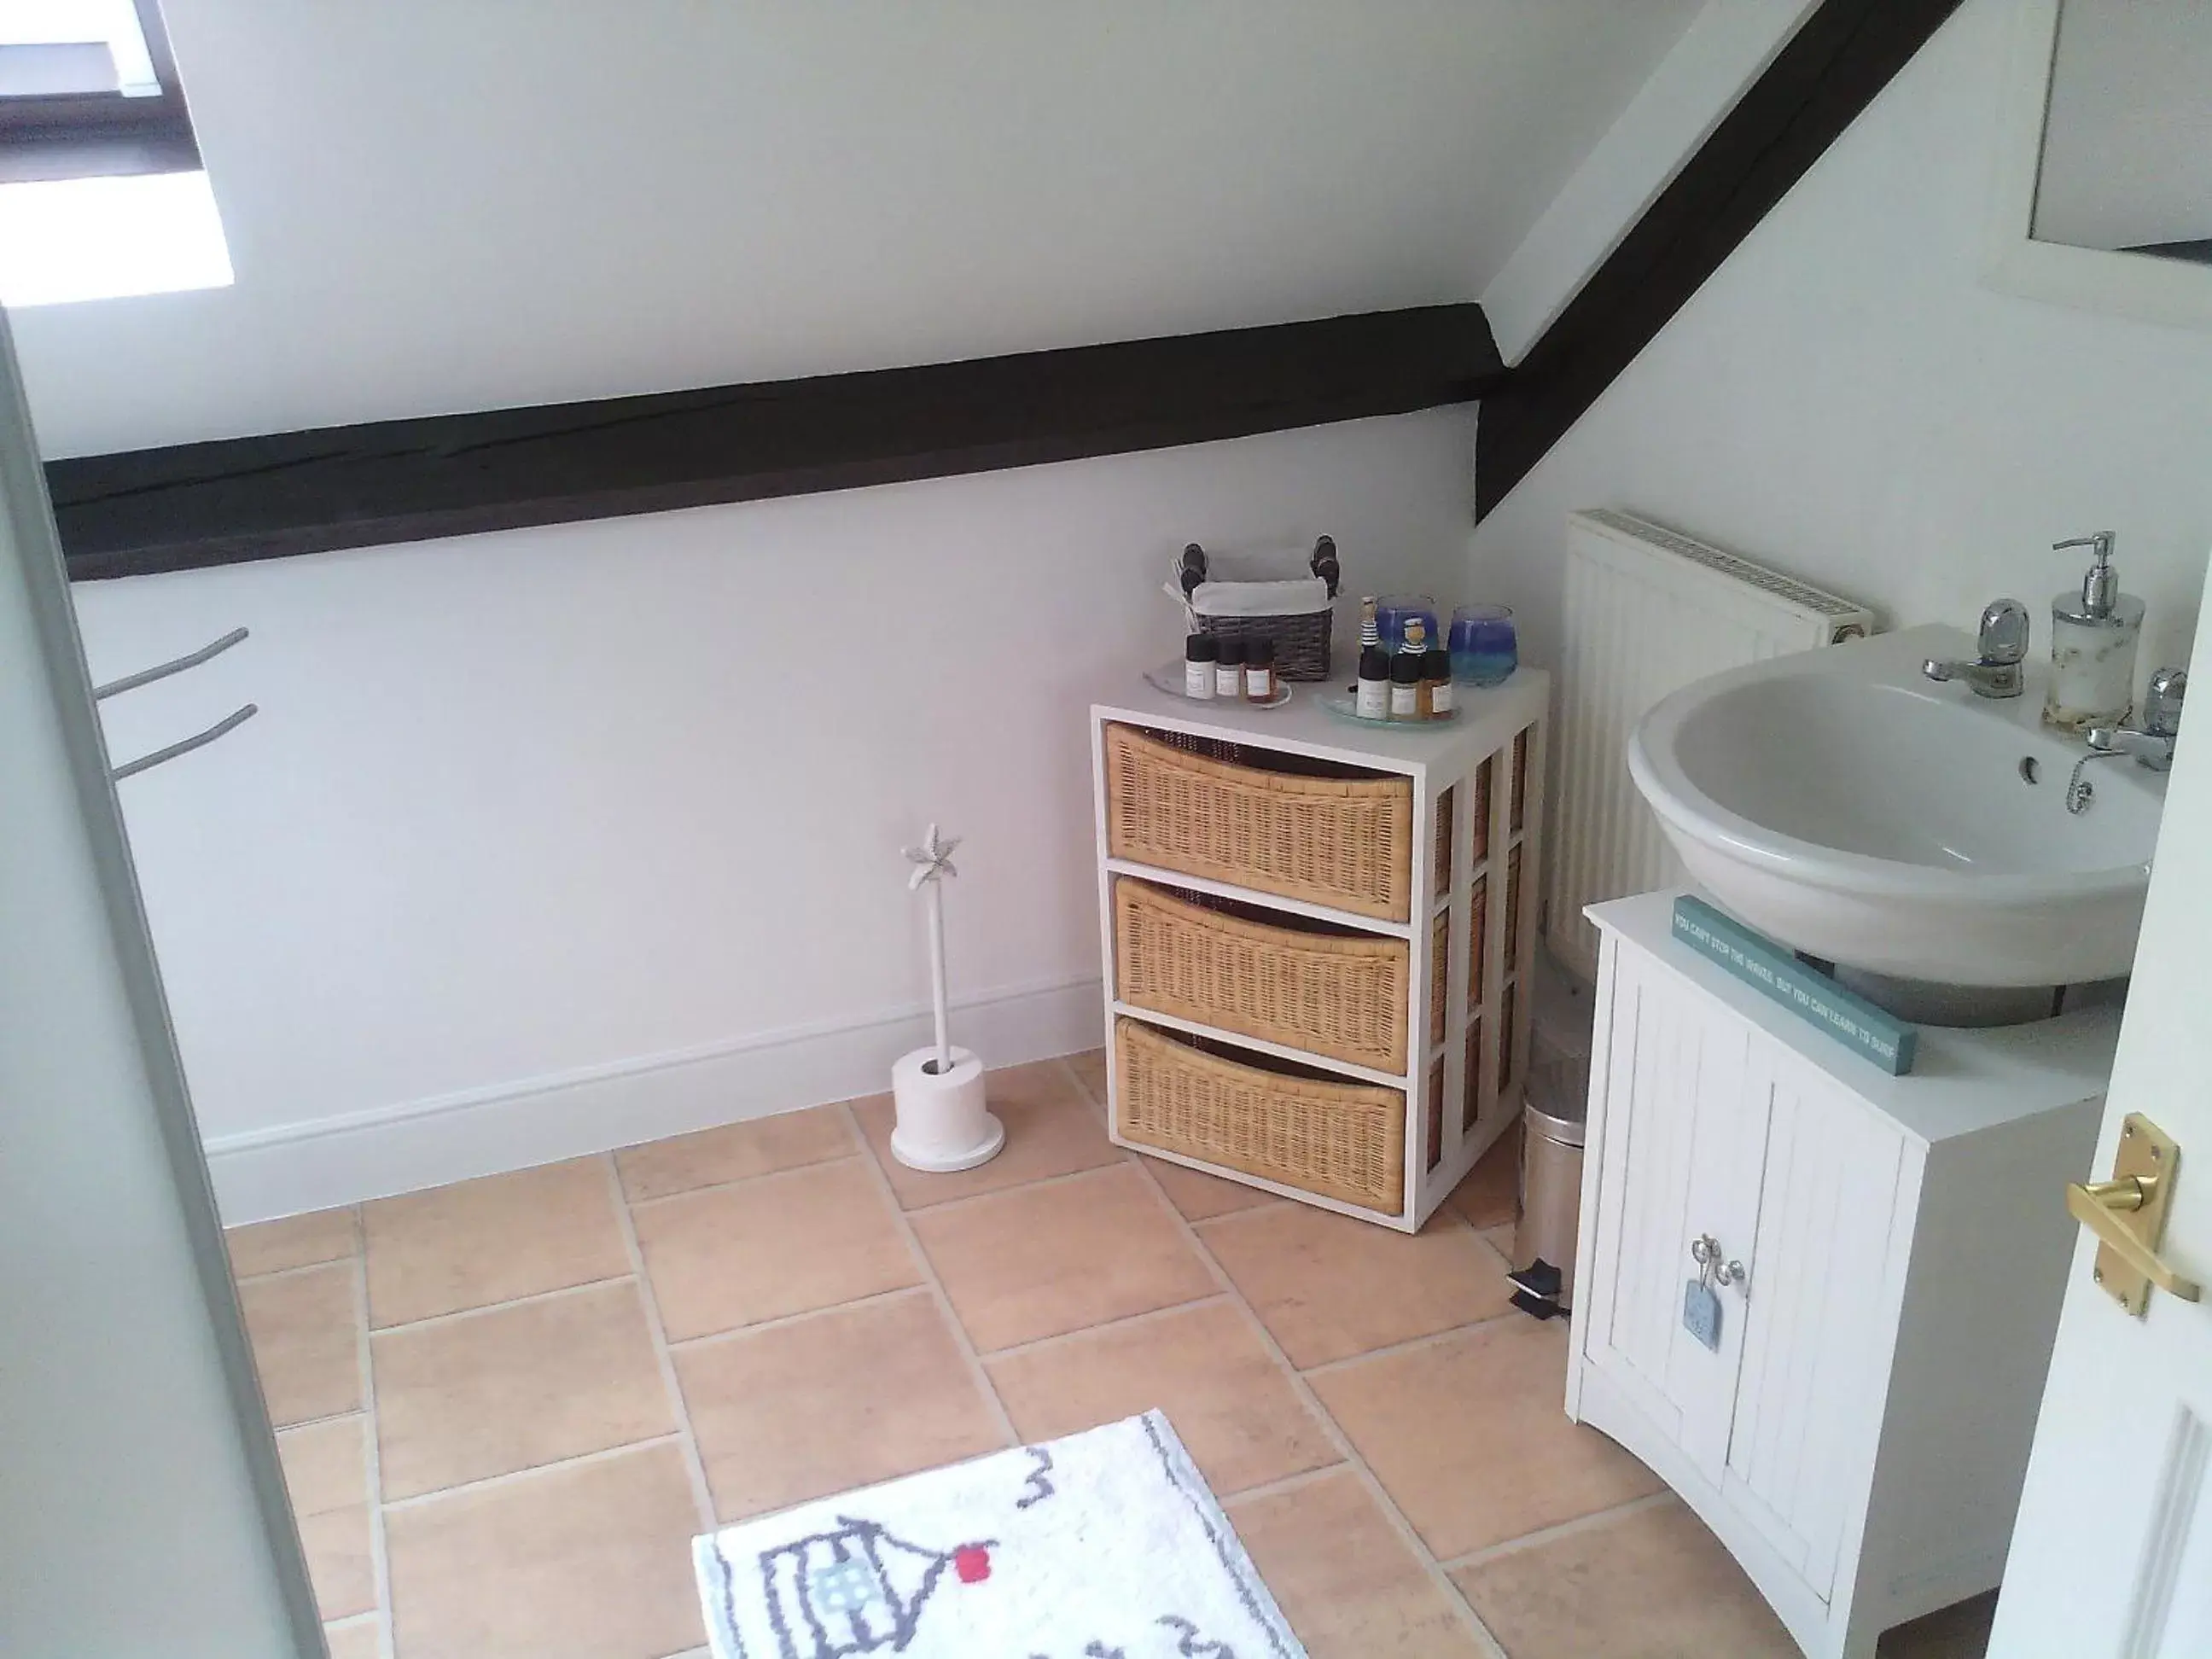 Bathroom in Yew Tree House